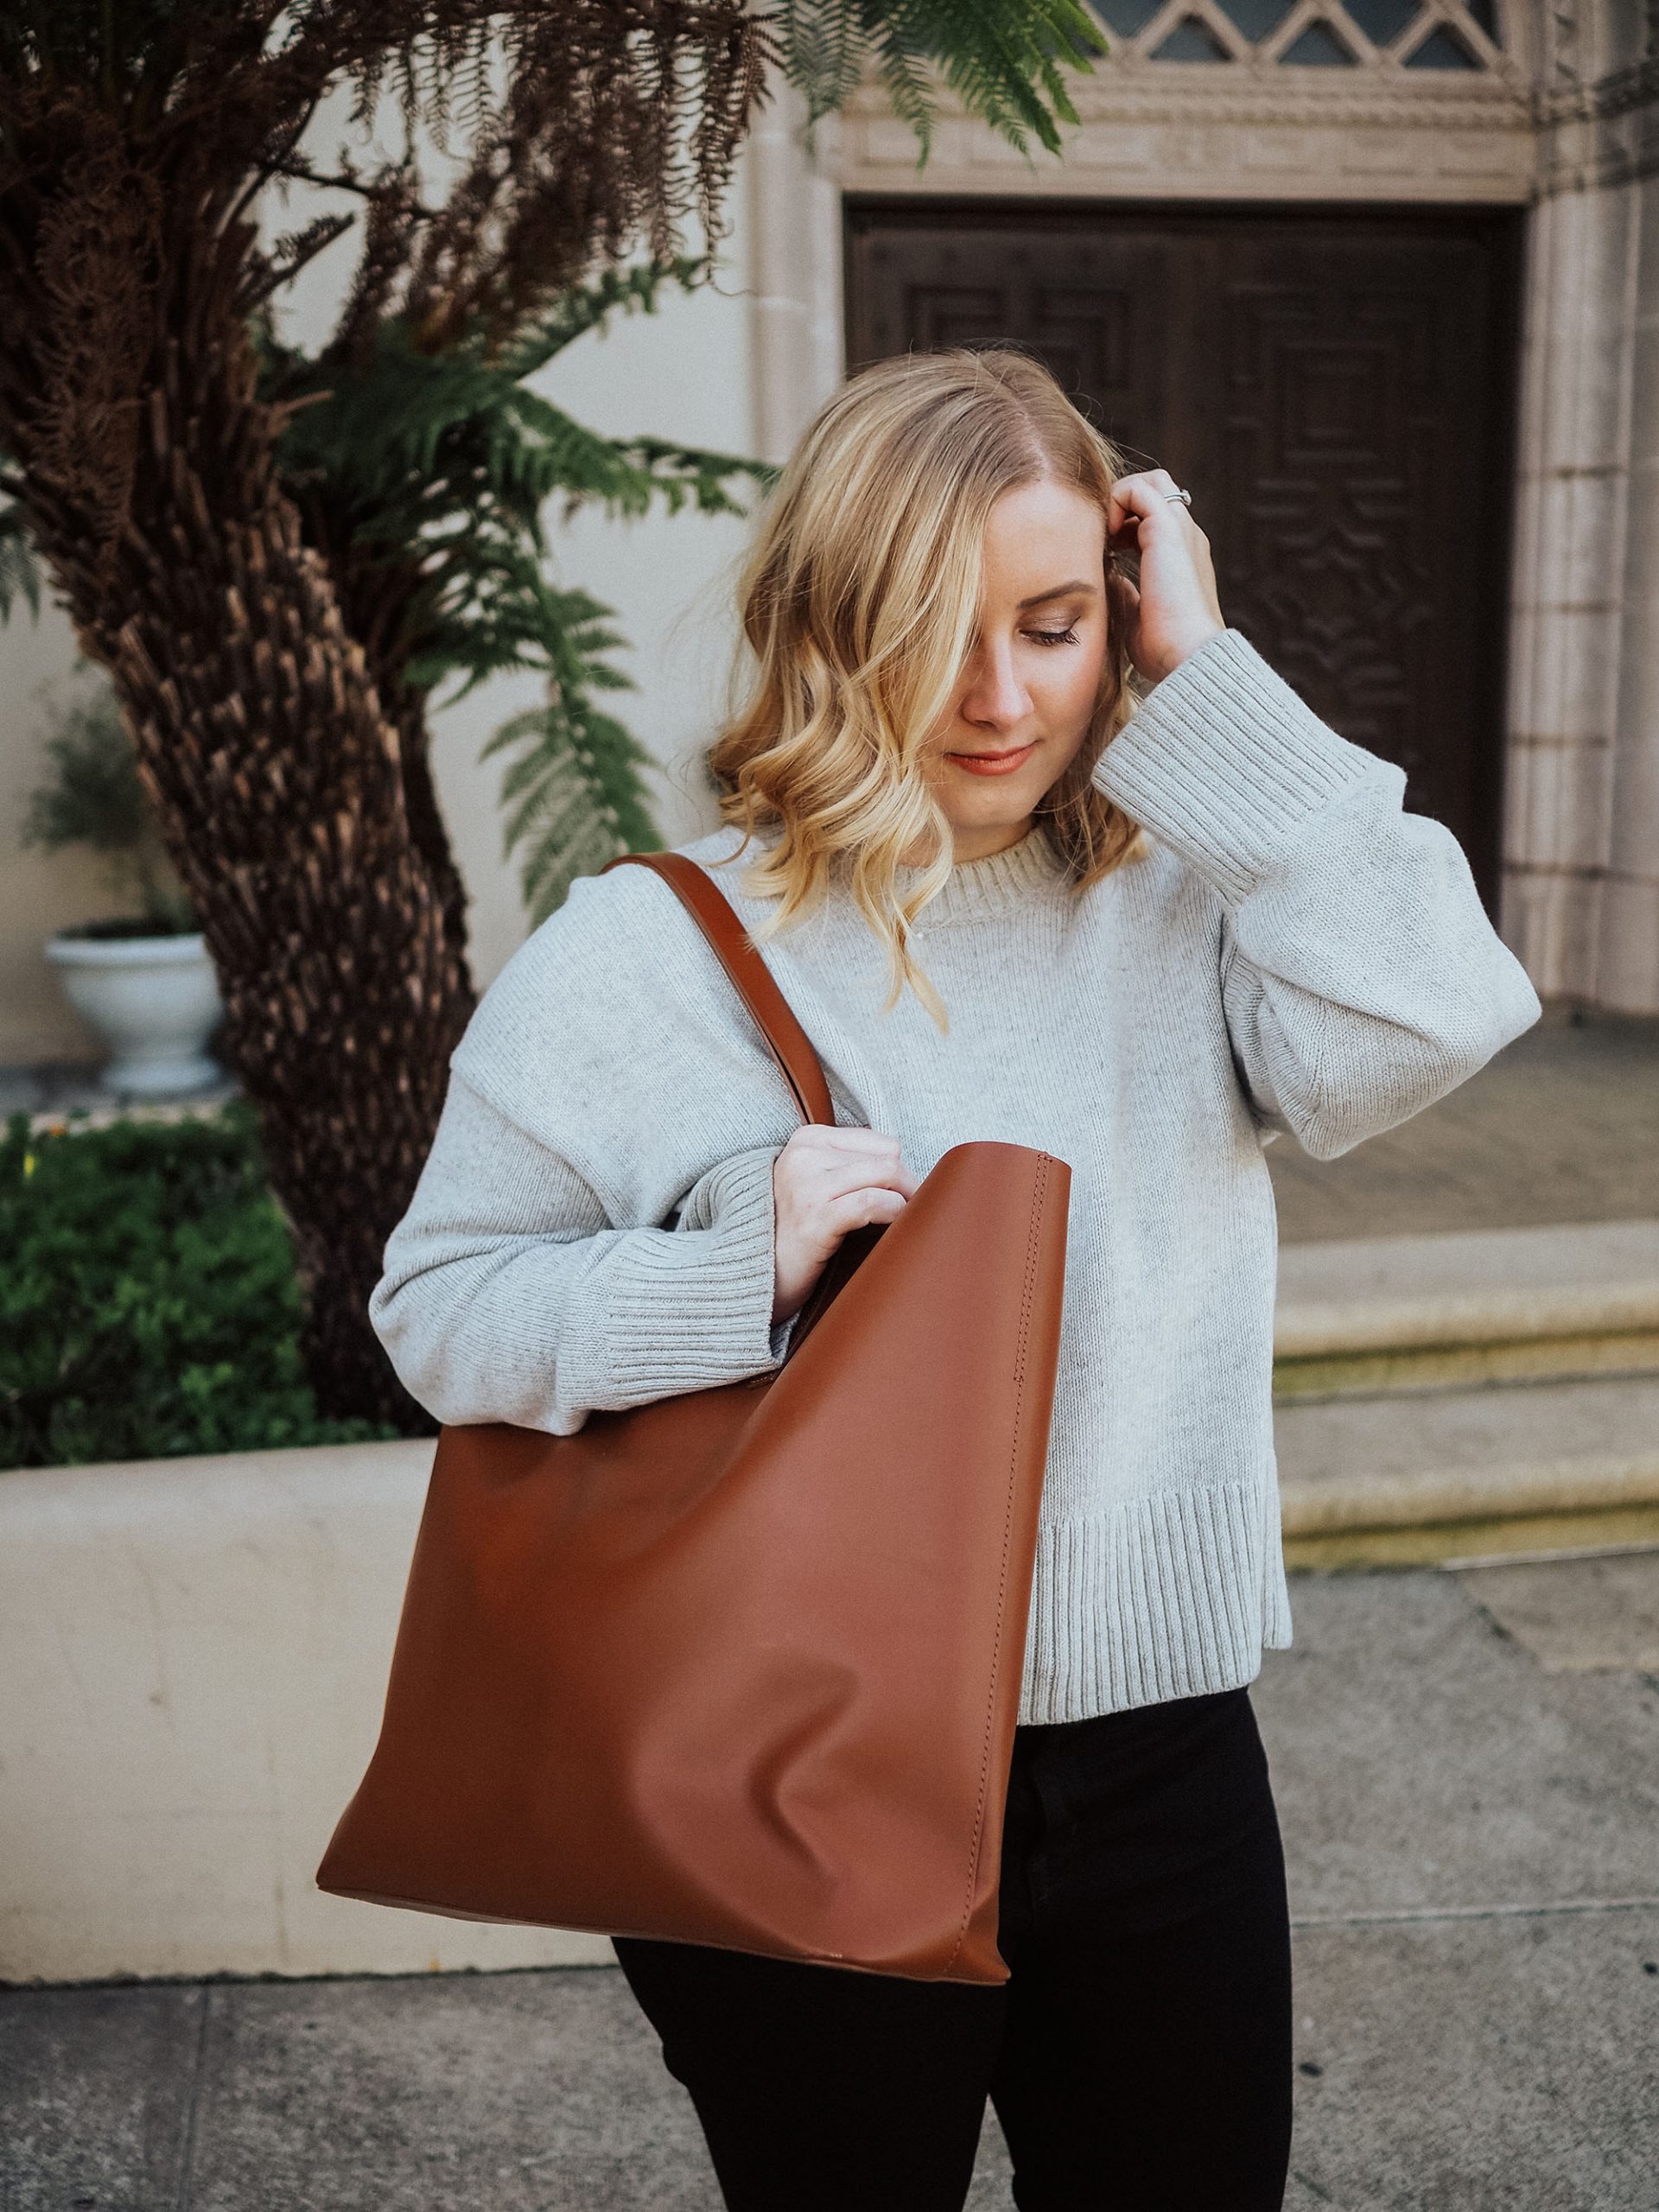 Everlane Twill Zip Tote & Pocket Tote Review - Welcome Objects